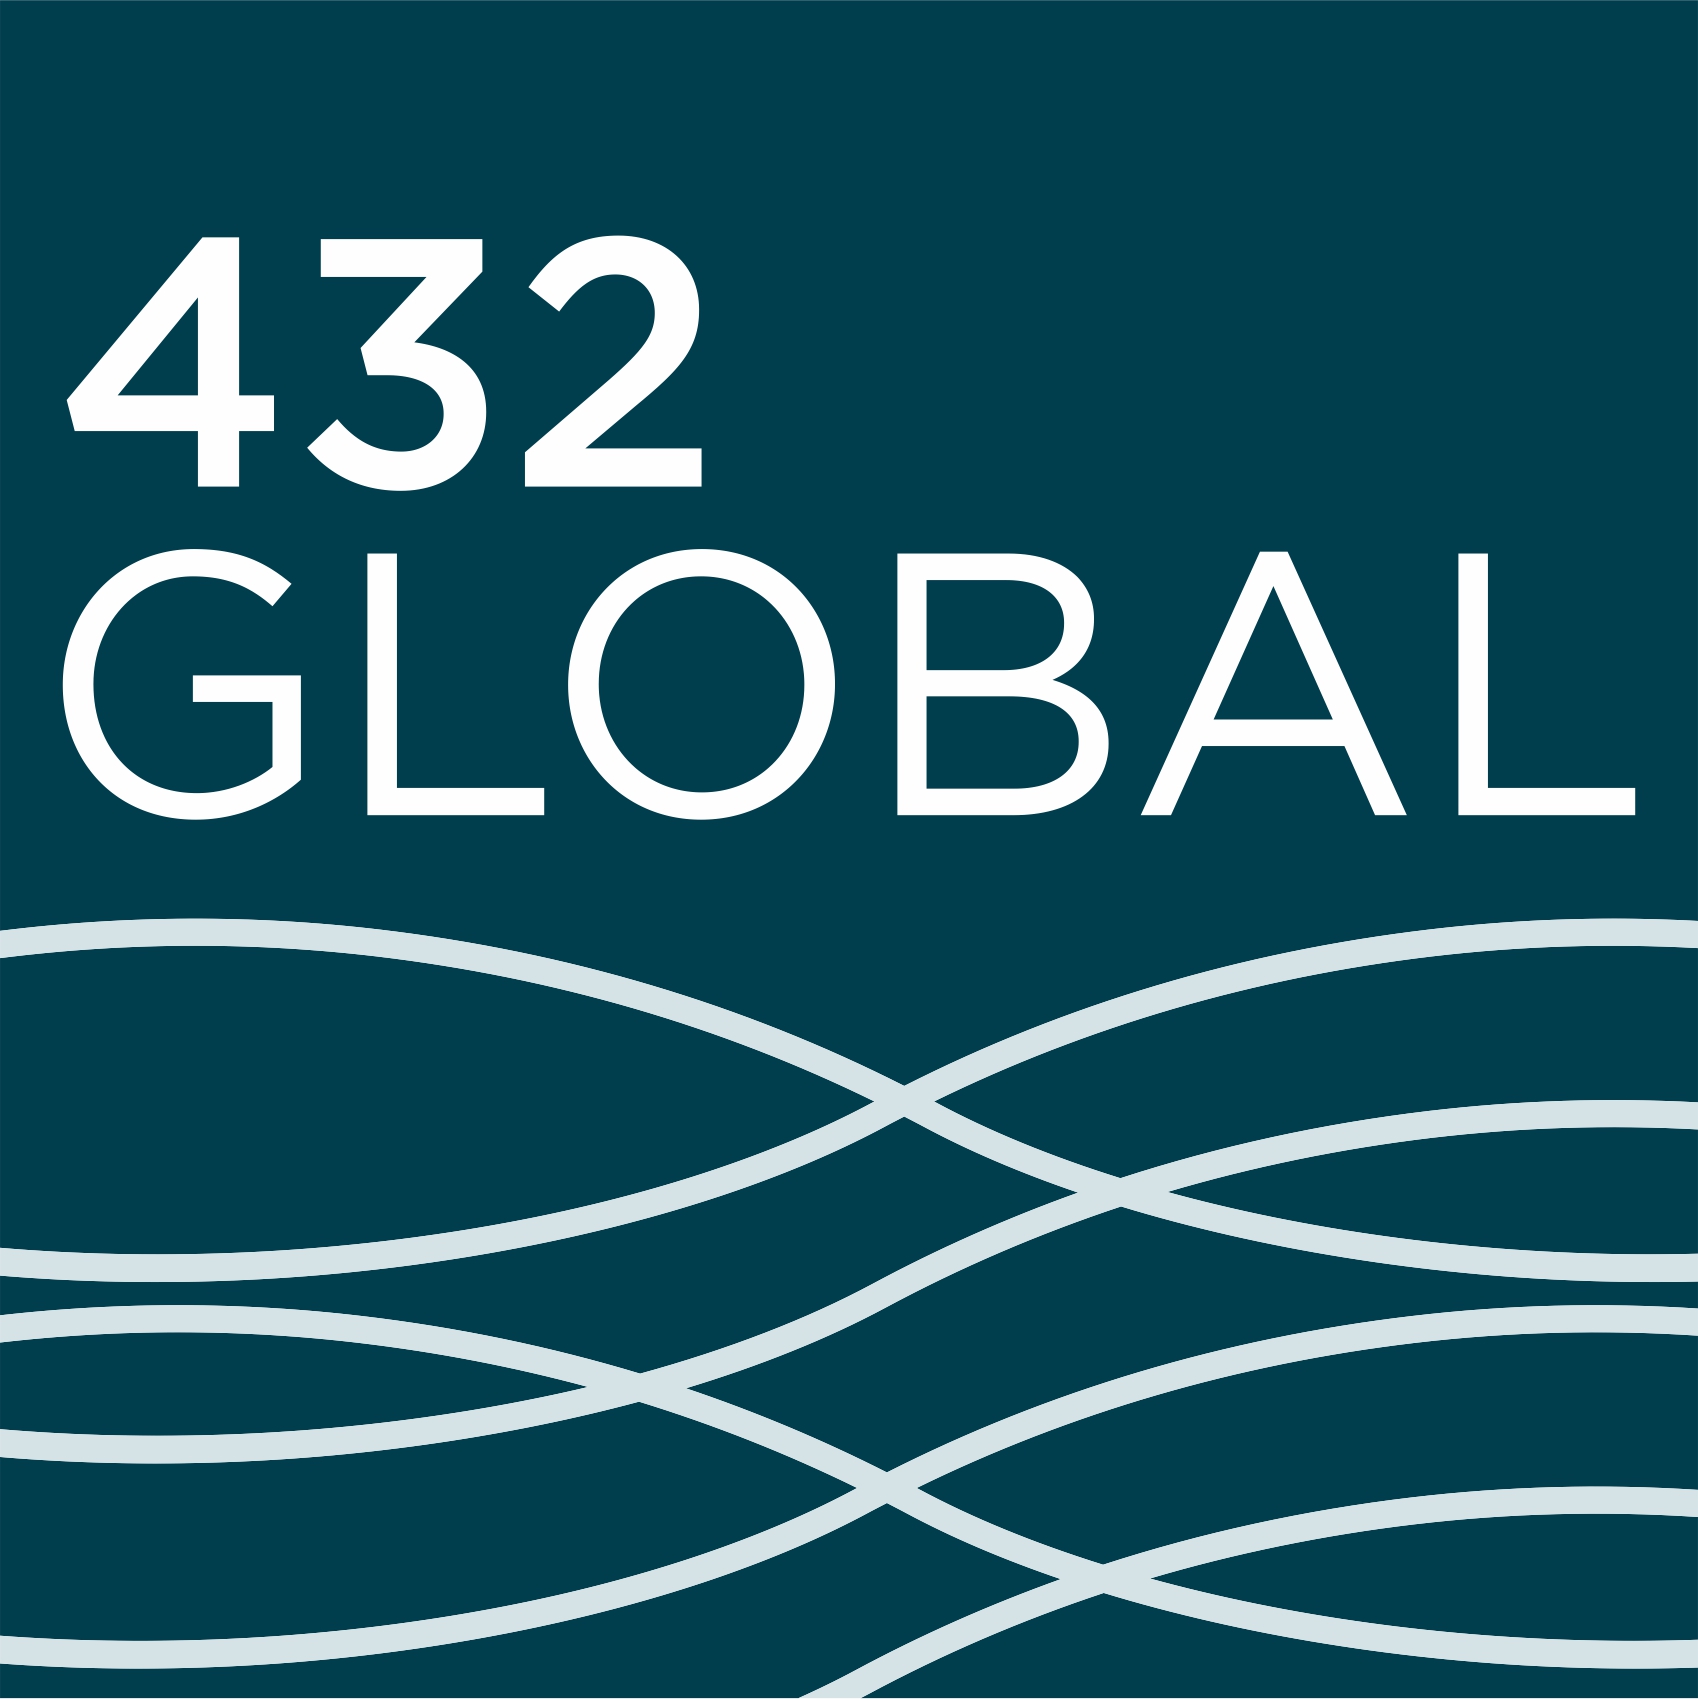 About Our Team 432 Global